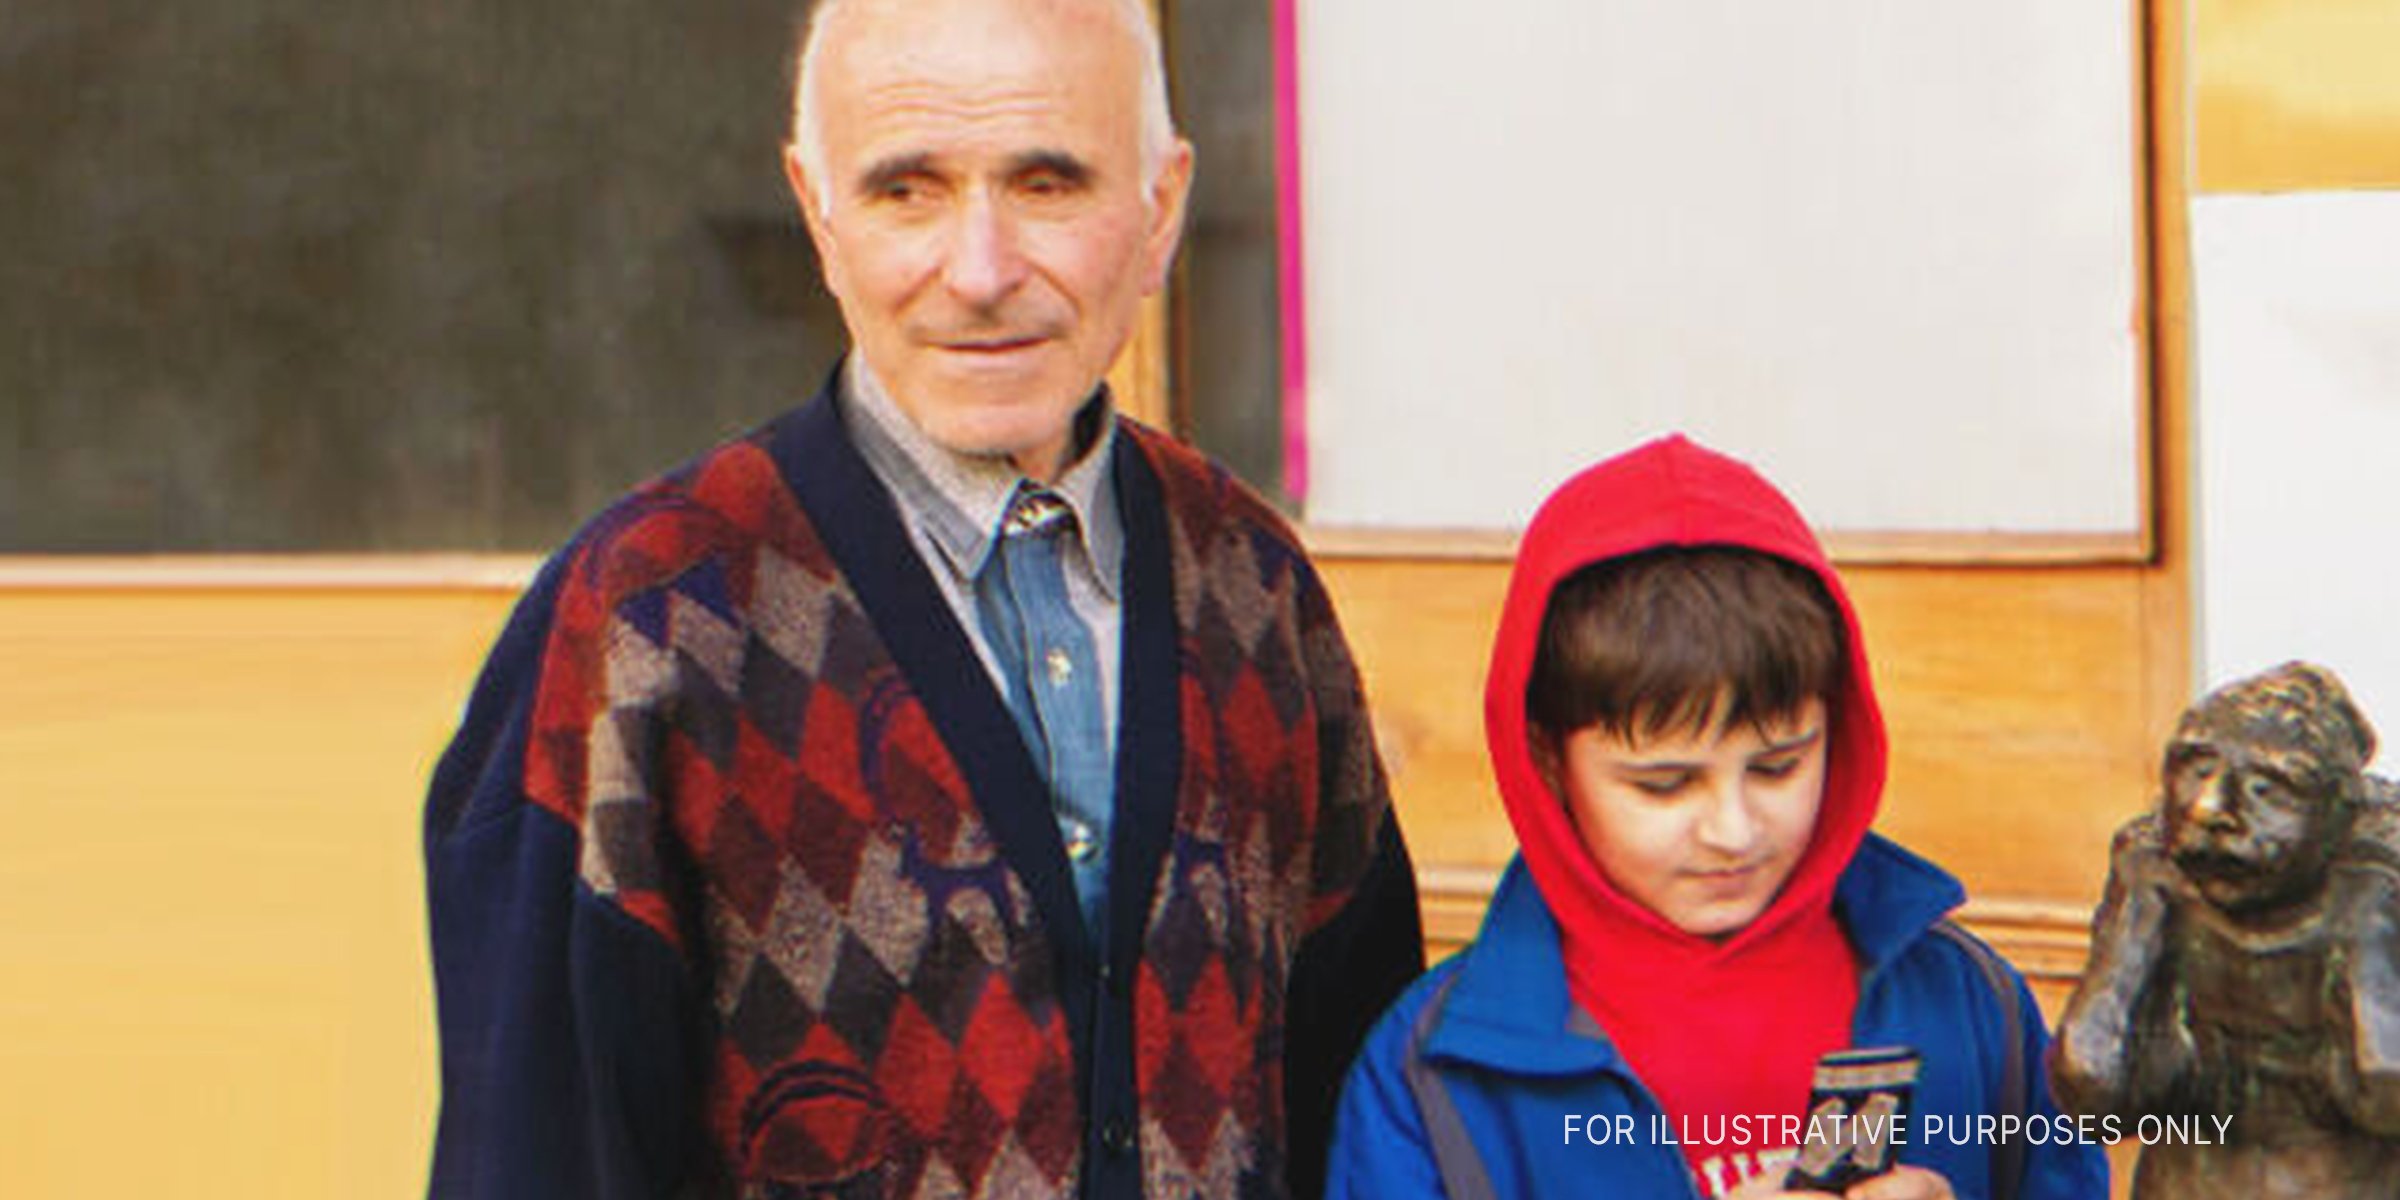 Old man with boy in class. | Source: Shutterstock